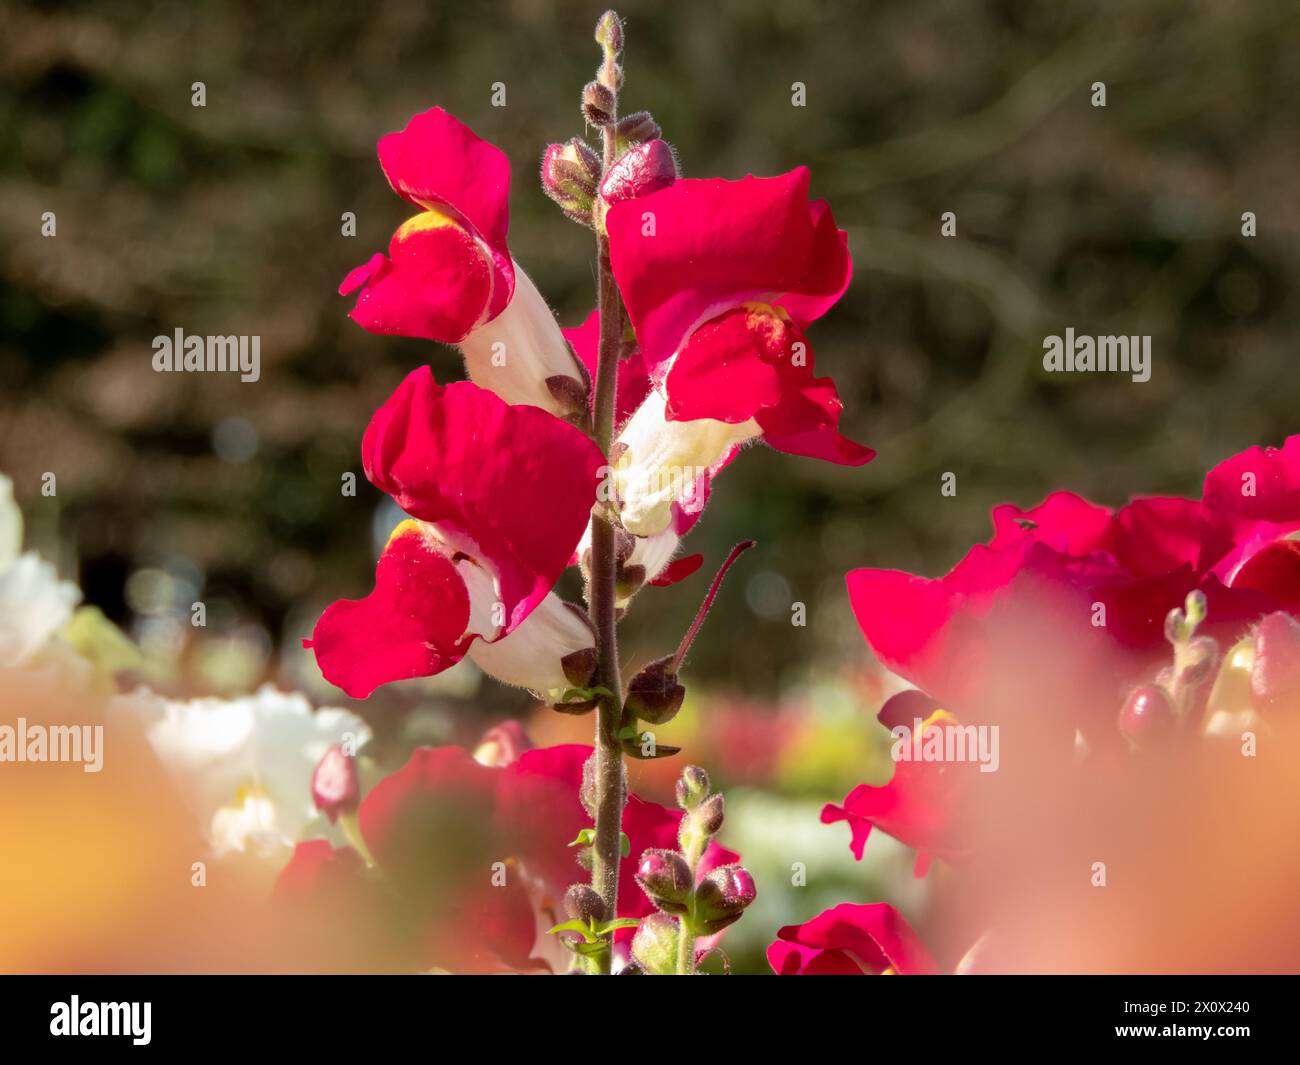 Common snapdragon wibrant red flowers. Antirrhinum majus flowering plant in the garden.  Spike inflorescence. Stock Photo